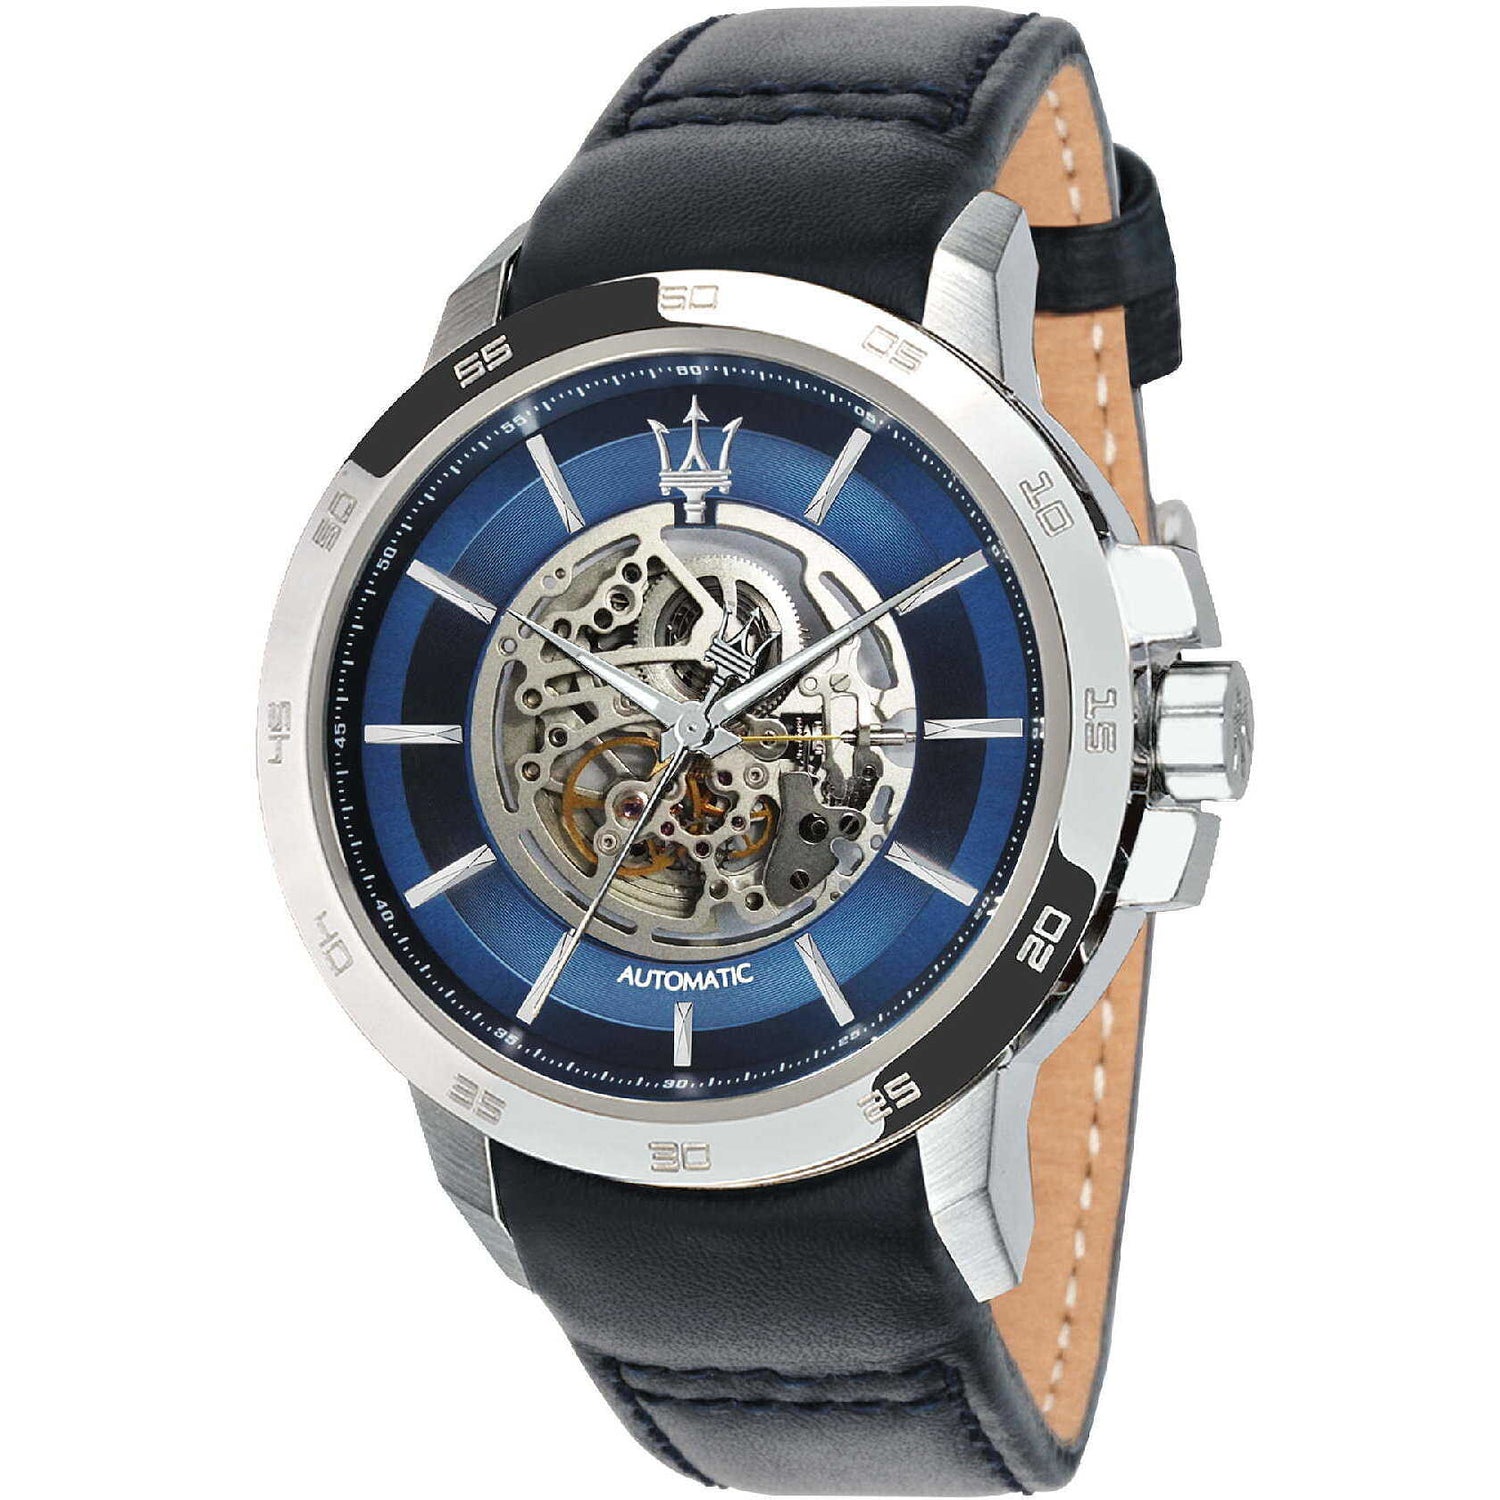 Maserati Ingegno Automatic Blue Open Heart Dial Men's Watch R8821119004 - BigDaddy Watches